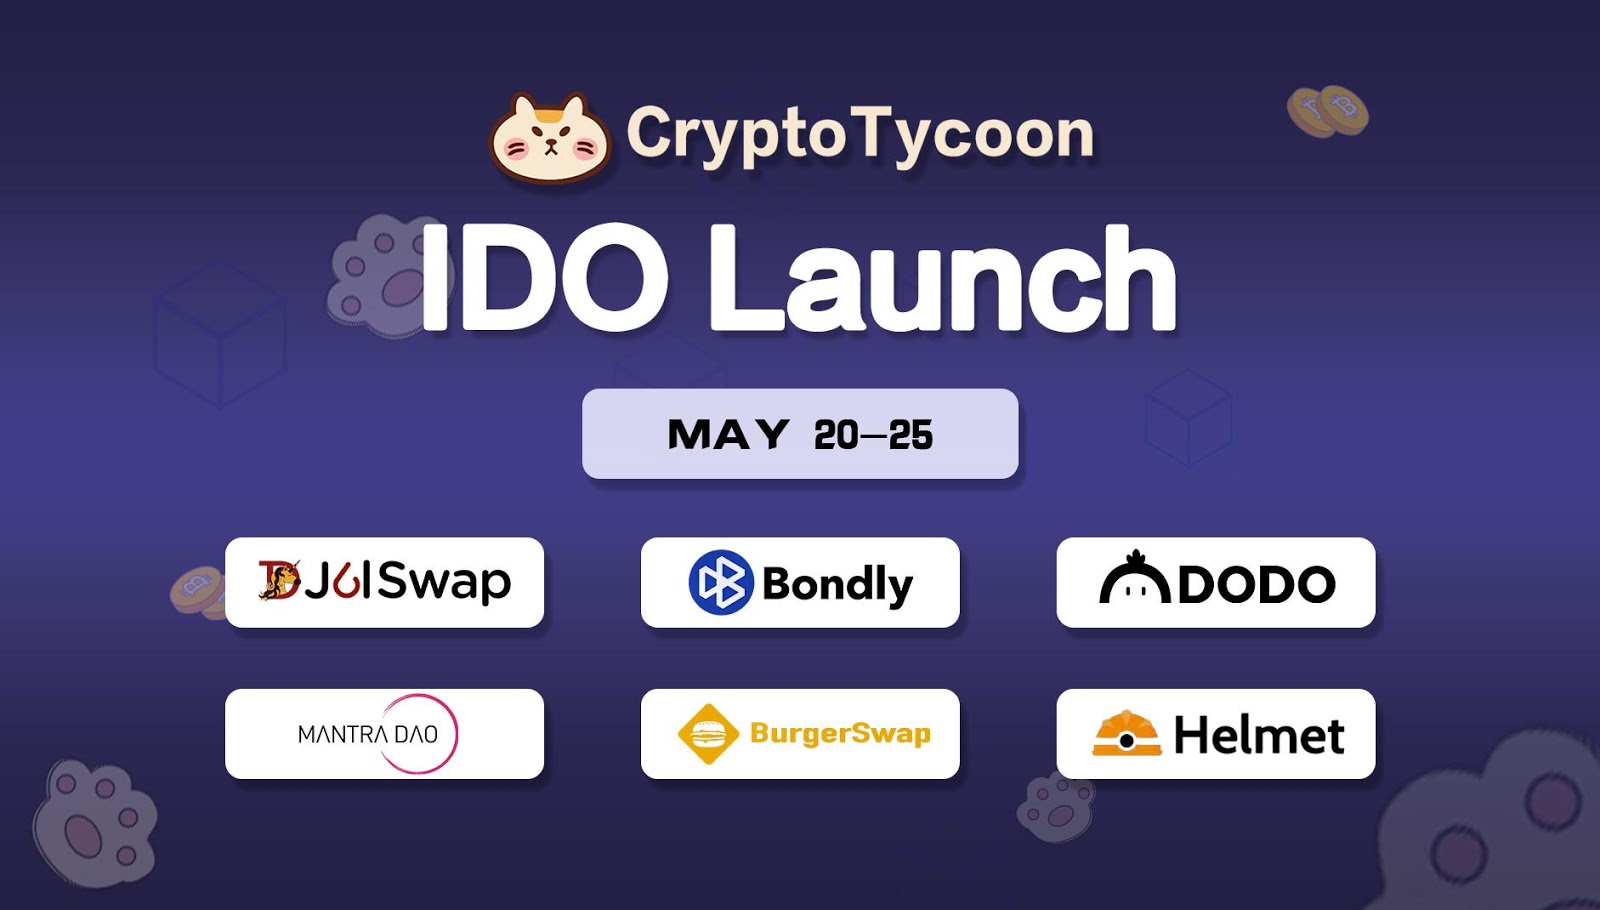 CryptoTycoon will launch its IDO from May 20th to 25th ...